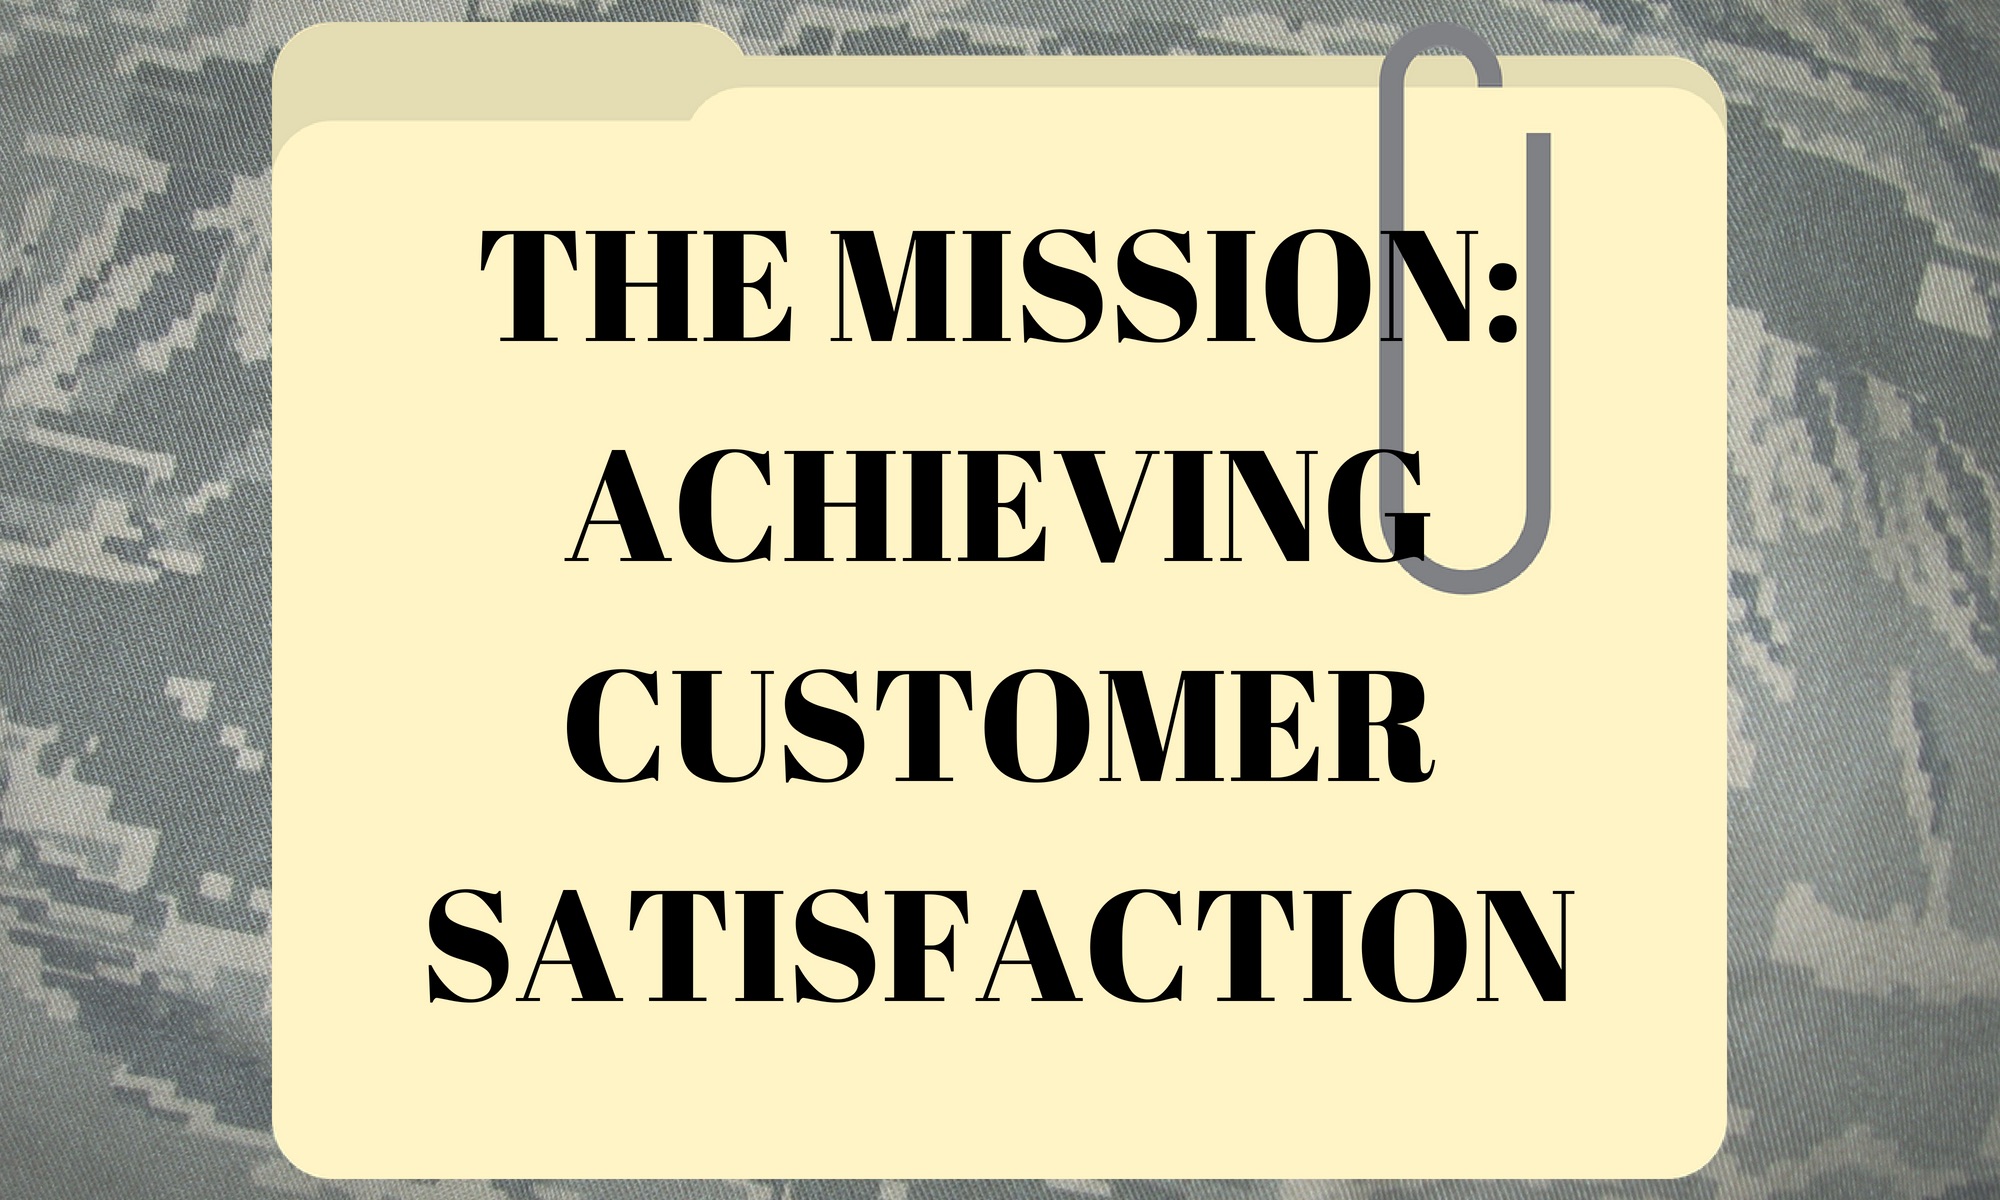 The Mission: Achieving Customer Satisfaction